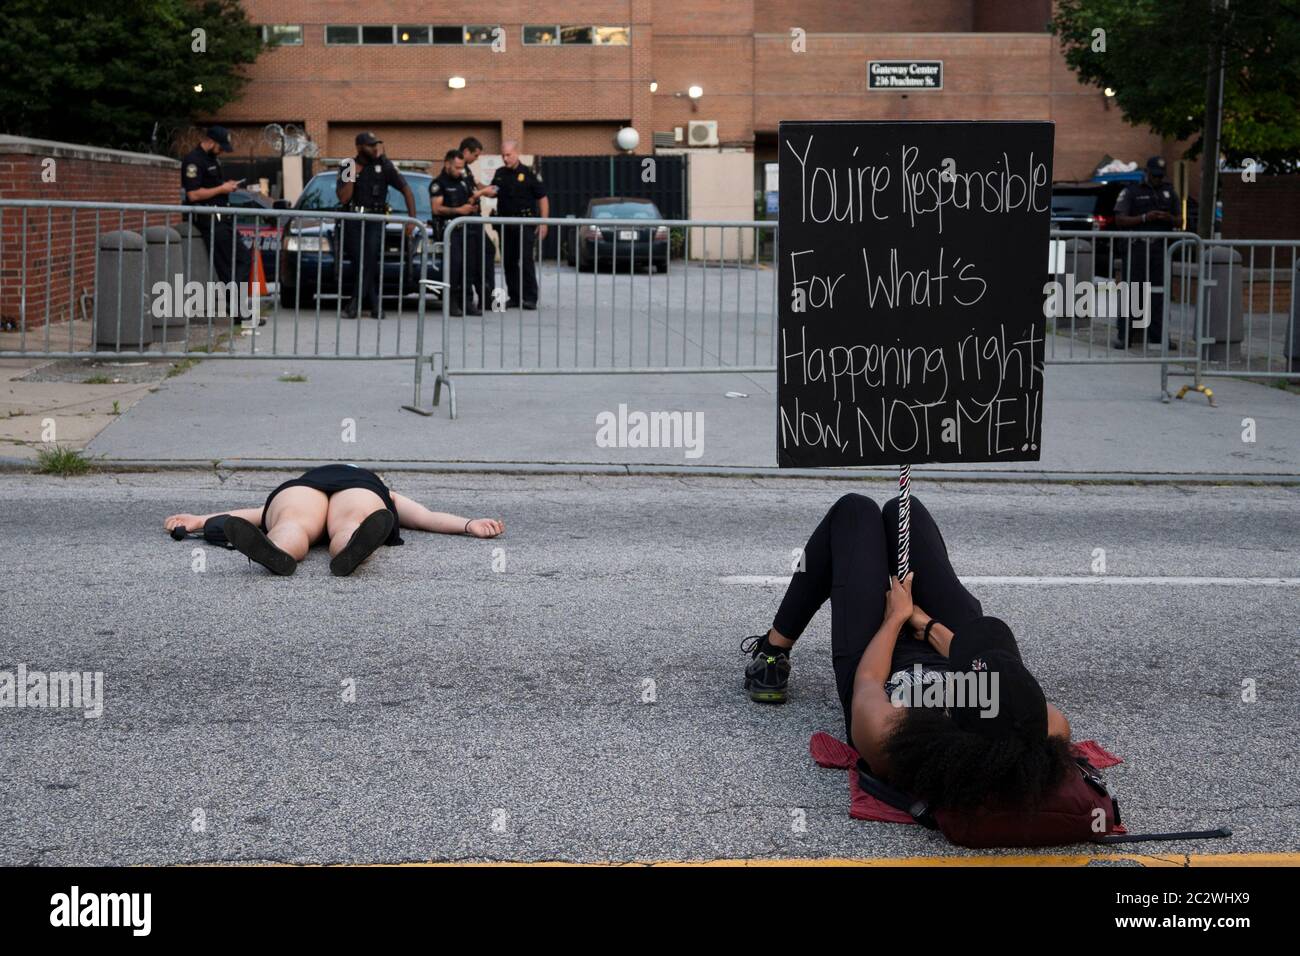 Atlanta, USA. 17th Jun, 2020. Protester holds a sign for police to see, outside of police headquarters in Atlanta, USA, during the Die-In protest for black lives. Credit: Micah Casella/Alamy Live News. Stock Photo